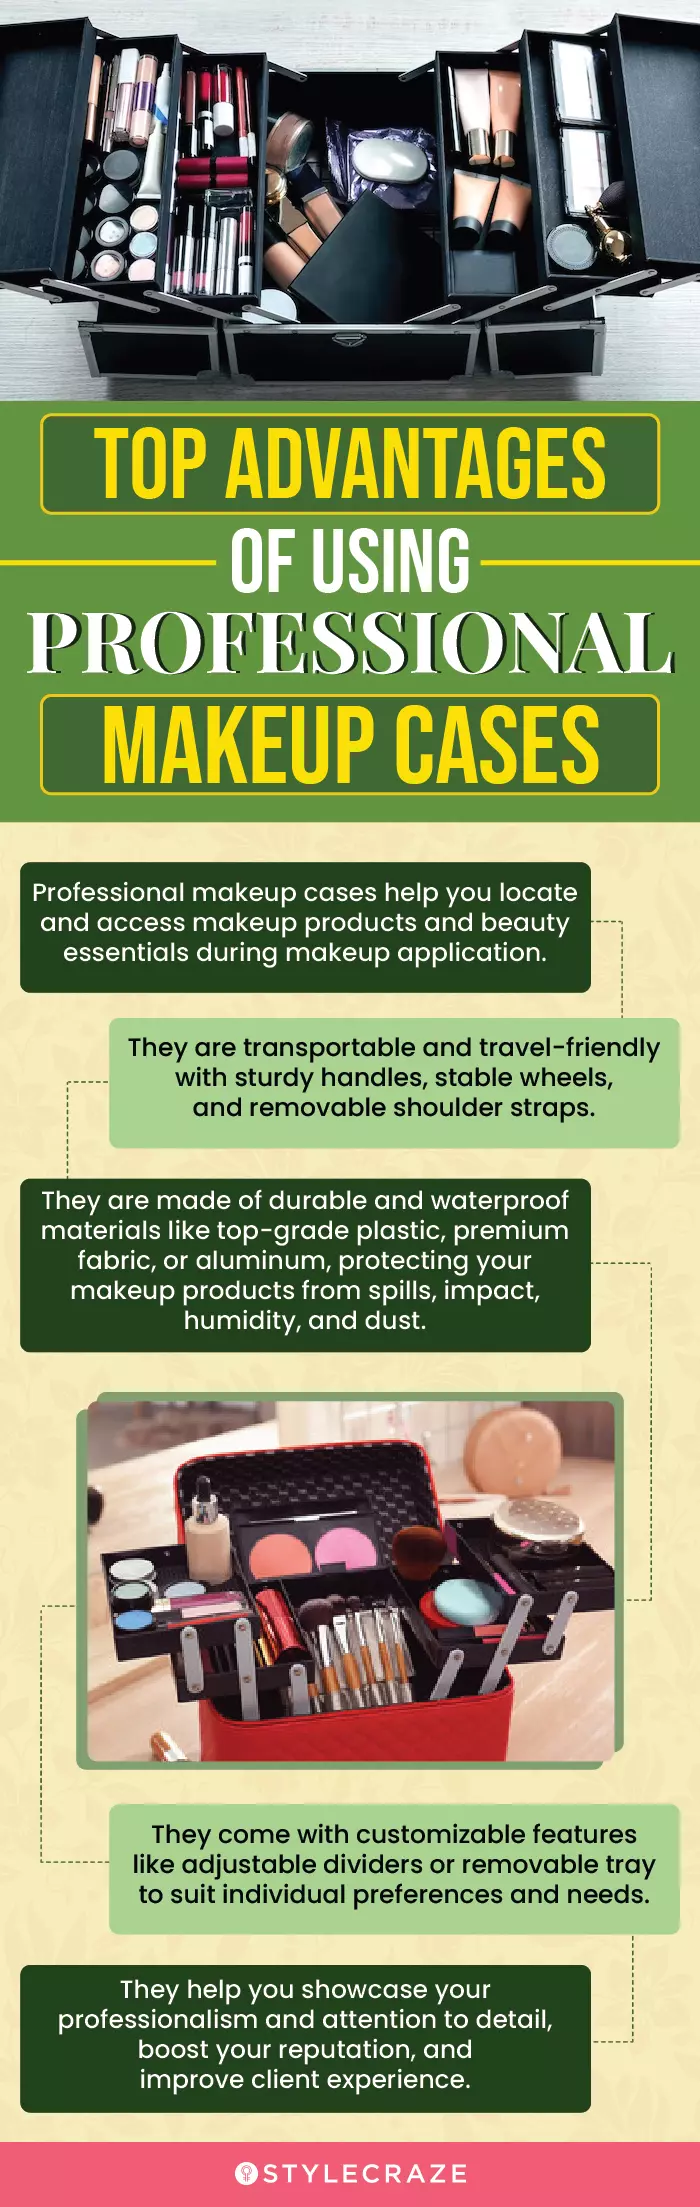 Top Advantages Of Using Professional Makeup Cases (infographic)